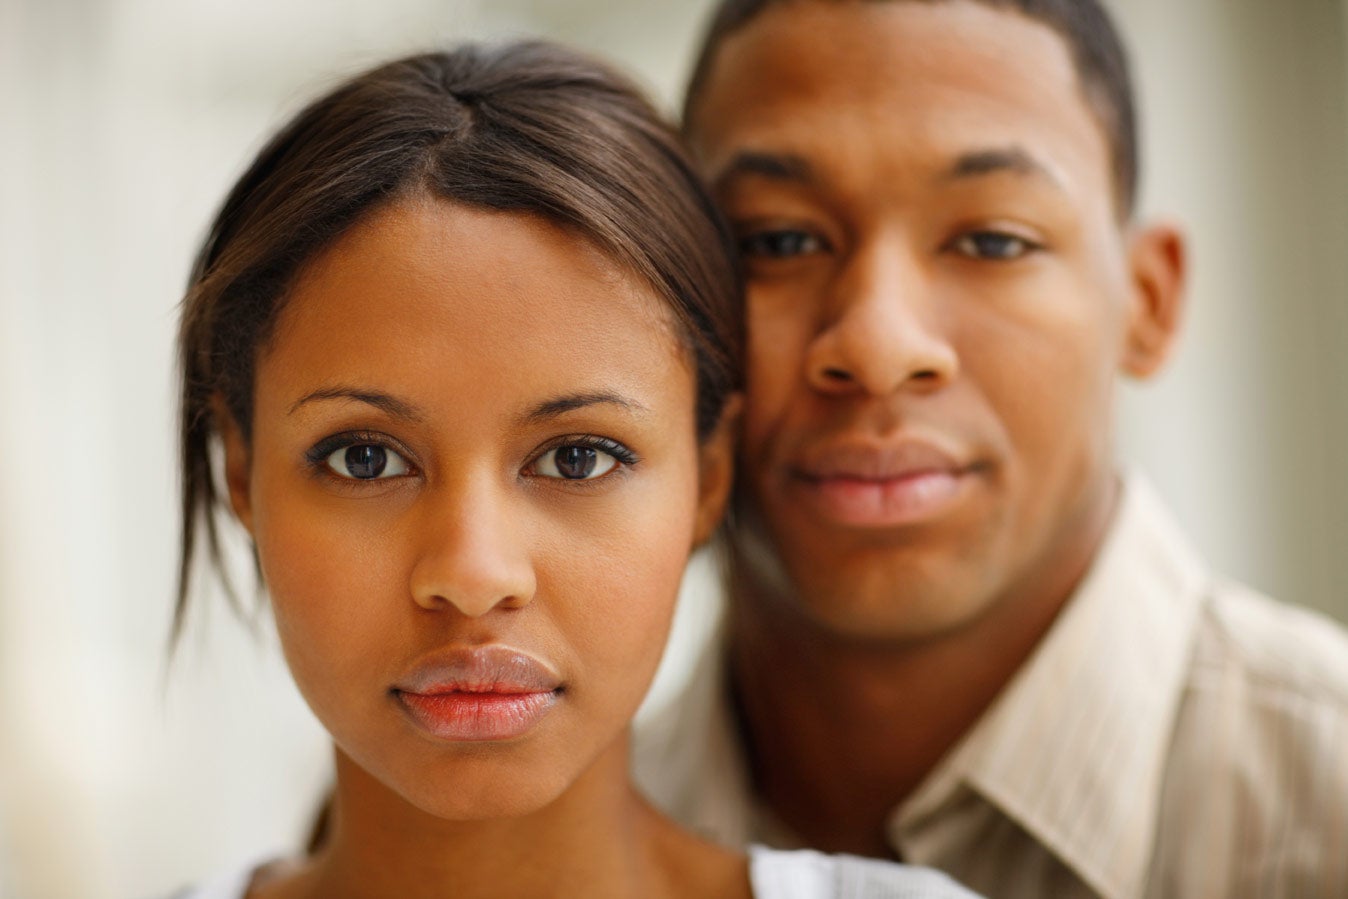 ESSENCE Poll: Would You Date Someone with an Incurable STD?